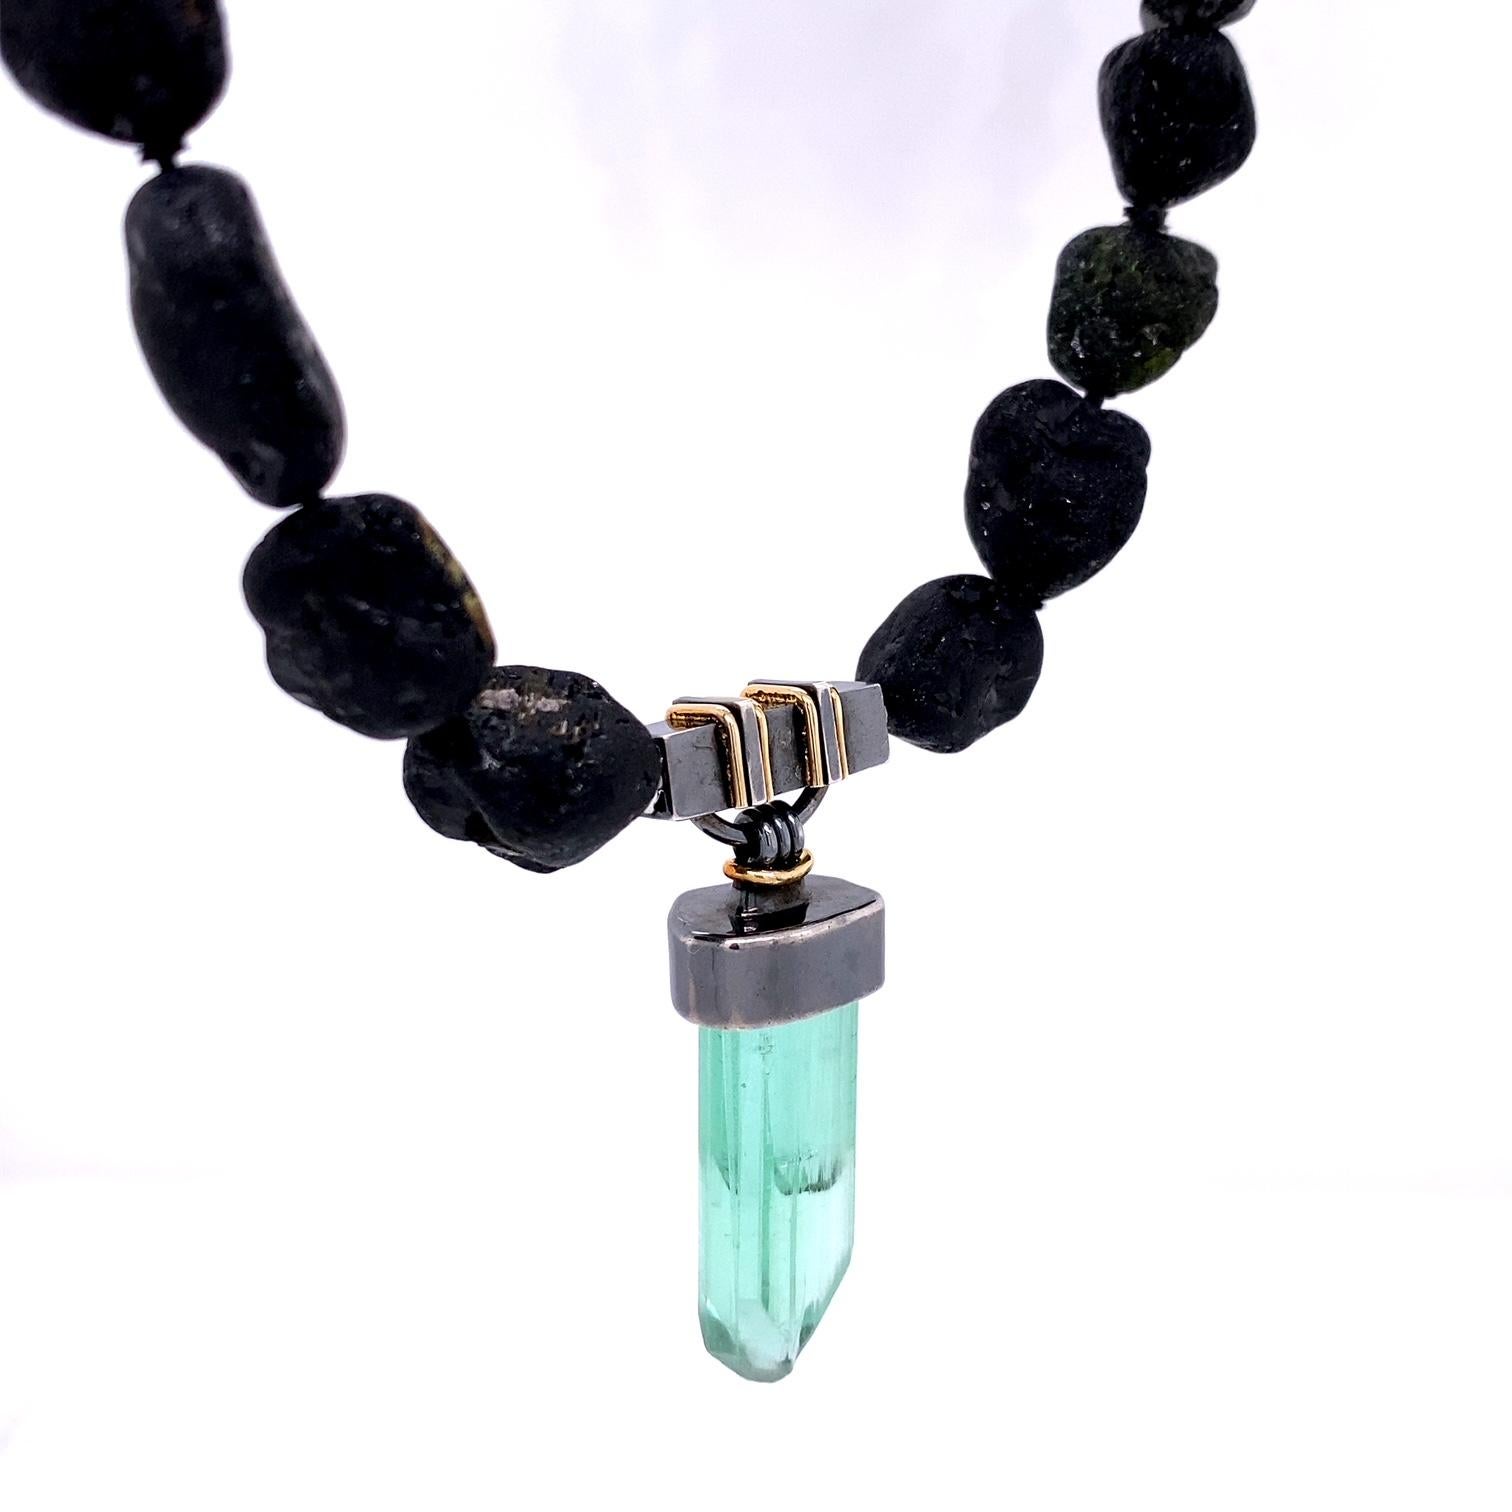 An oxidized sterling silver and 18k yellow gold clasp set with a green tourmaline crystal on a black tumbled tourmaline strand with stainless steel nittel parts. This necklace includes an 18k white gold web clasp to enable the black tourmaline to be